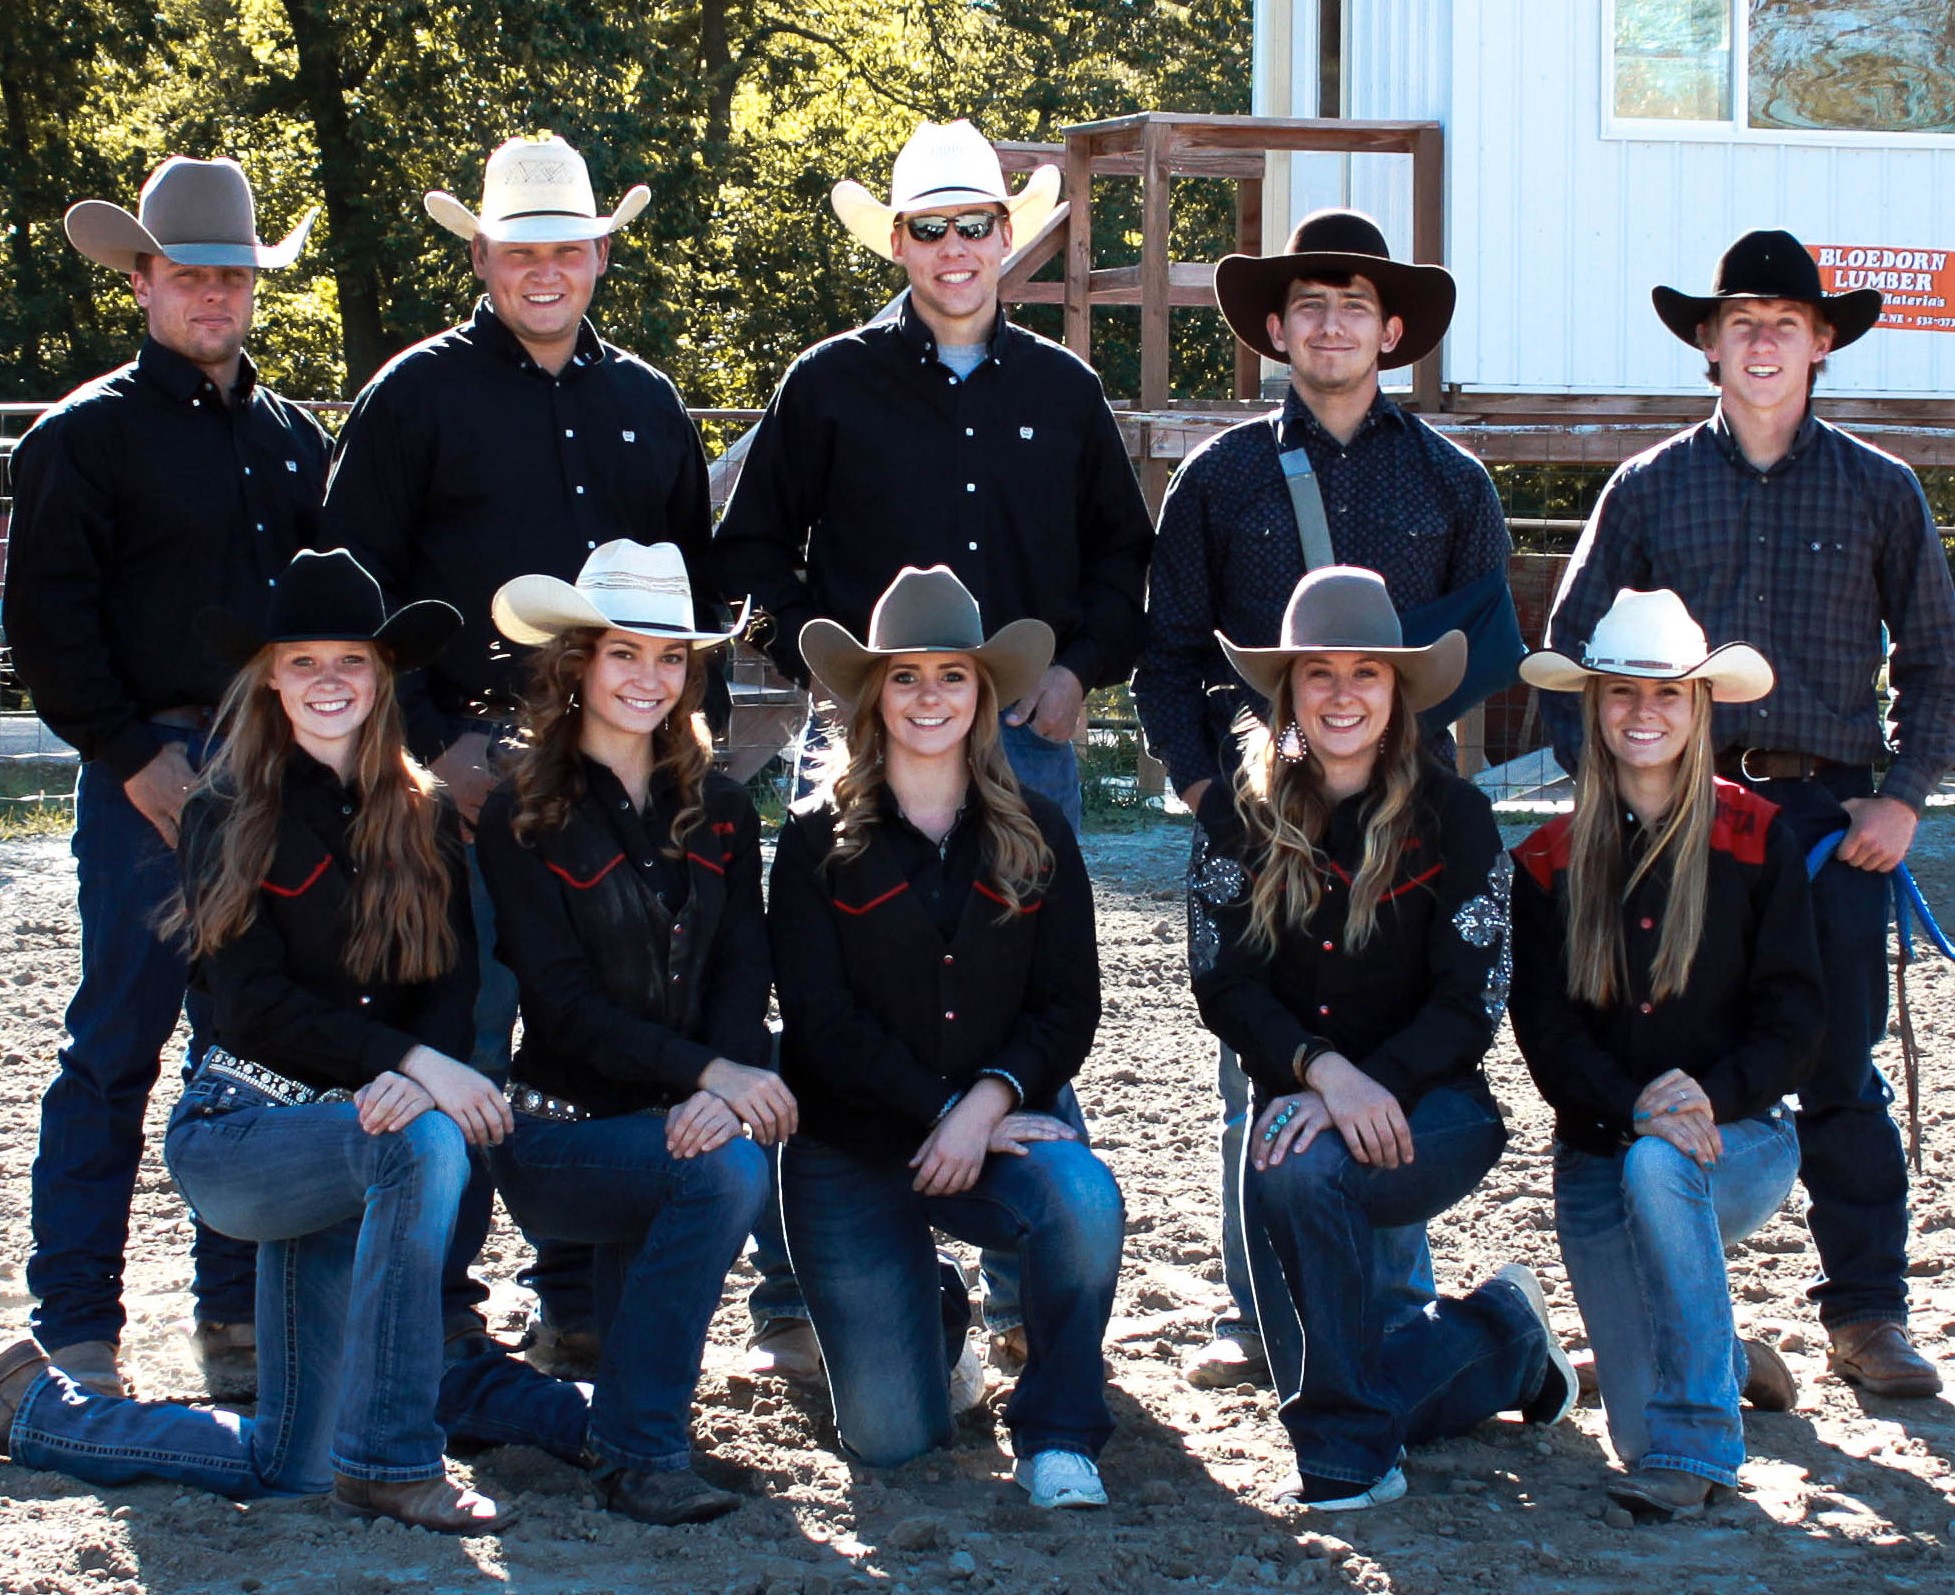 Aggie Rodeo Women’s Team (front, from left) Madison Schnase, Lincoln; Emma Bassler, Blair; Cheyenne Eden, Humboldt; Tara Spatz, Trotwood, Ohio; and Shelby Dismuke, Pine, Colorado. Men’s Team (back, from left) Baily Holt, Ainsworth; Trey Baum, Elgin; Quentin Anderson, Pierce; Austin Porras, Greeley, Colorado; and Jebb Ginkens, Harrison. (Photo credit: Tori Rossenbach)